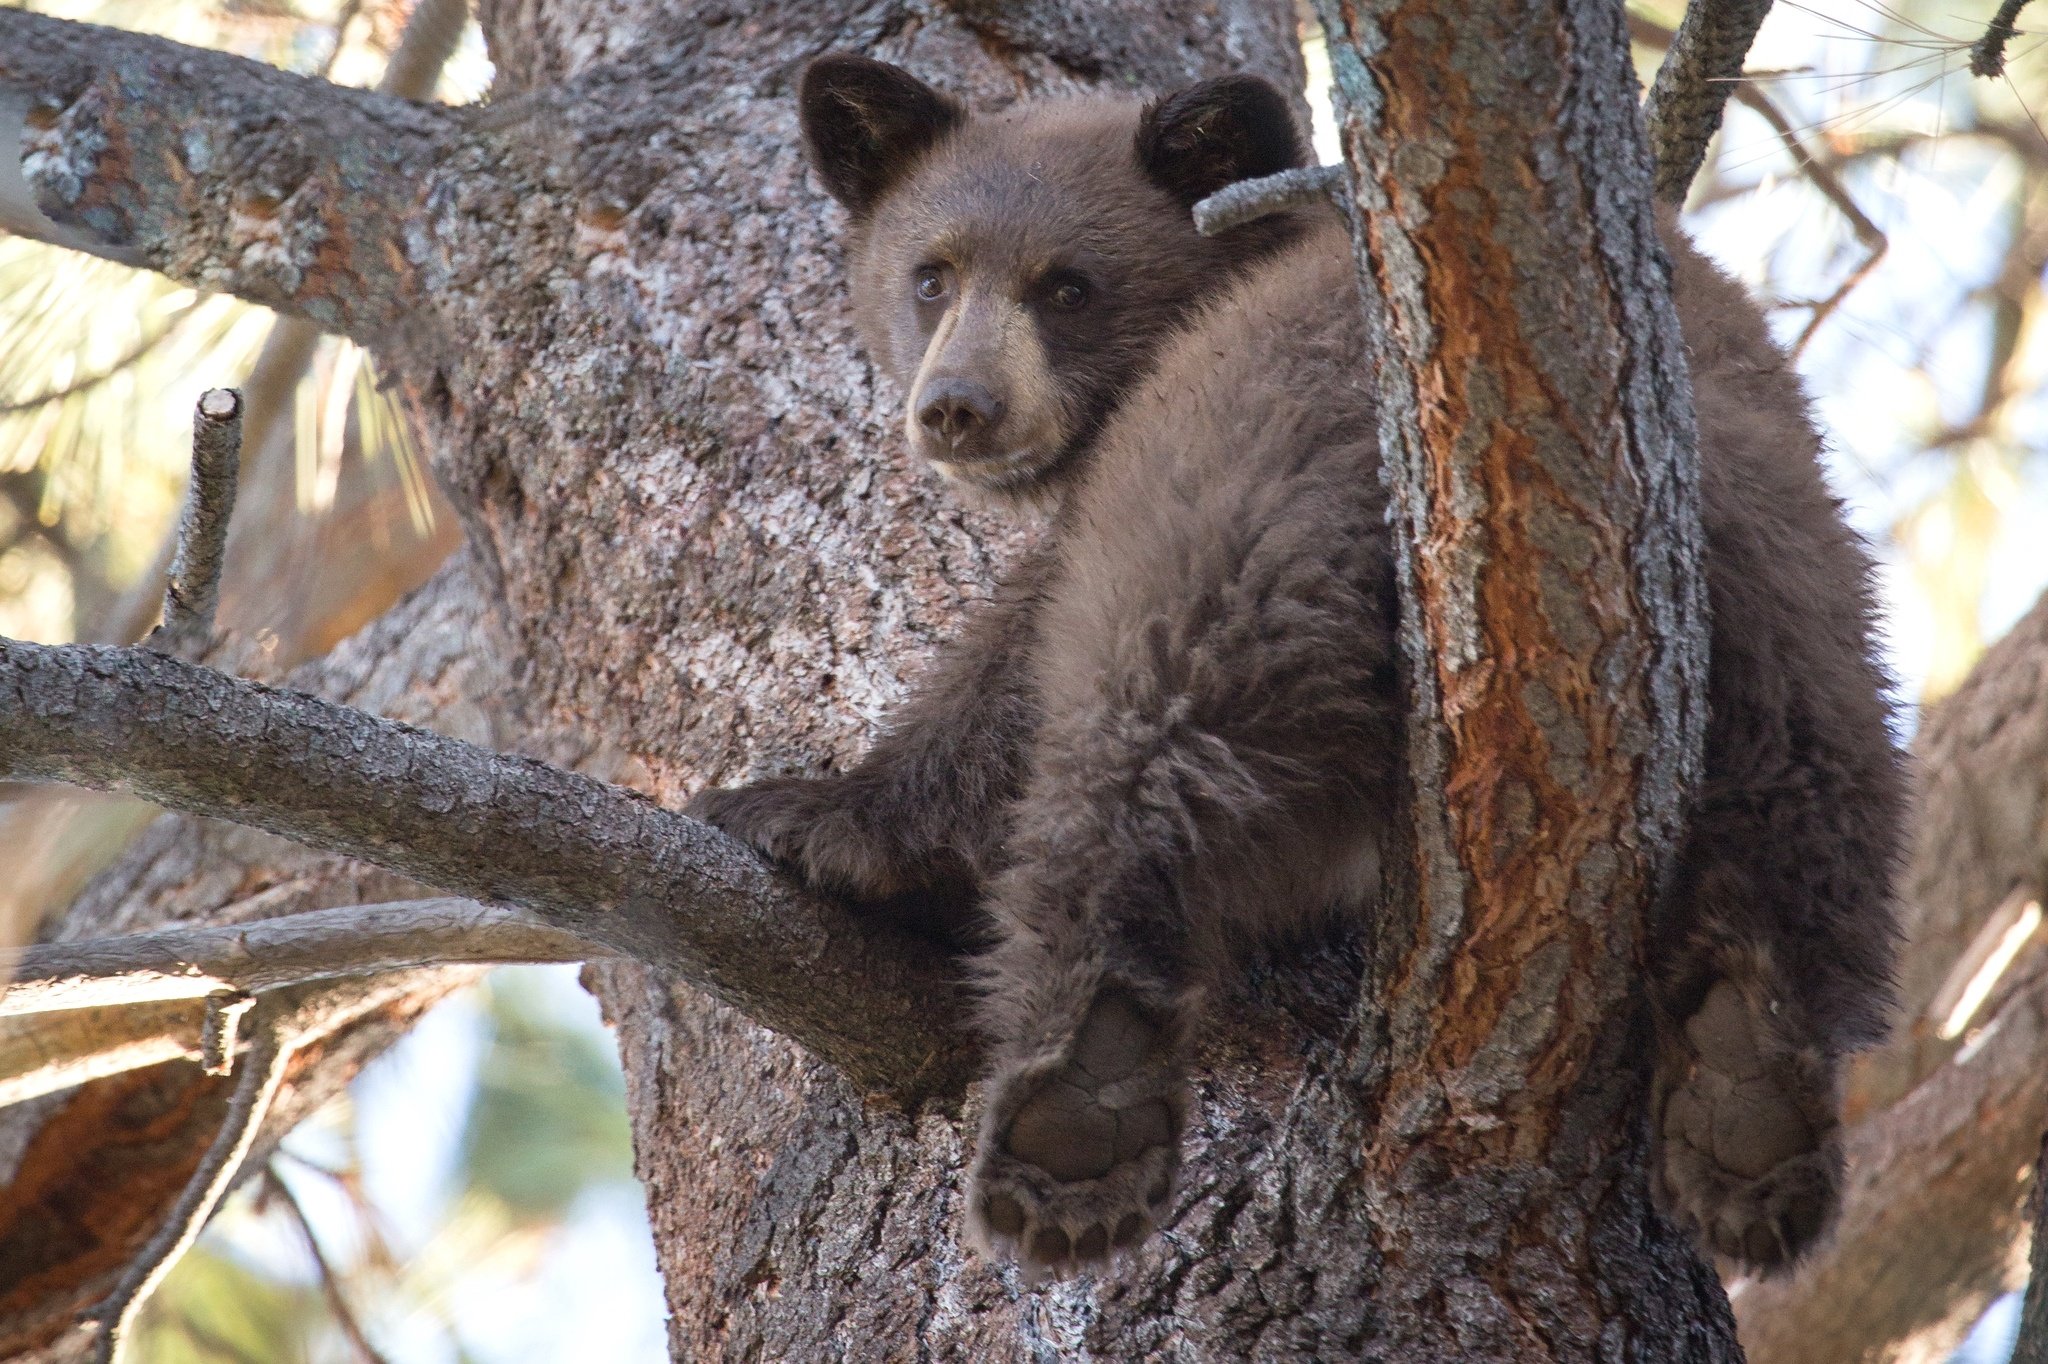 bears, Brown, Trunk, Tree, Branches, Animals, Bear, Cub, Baby, Cute